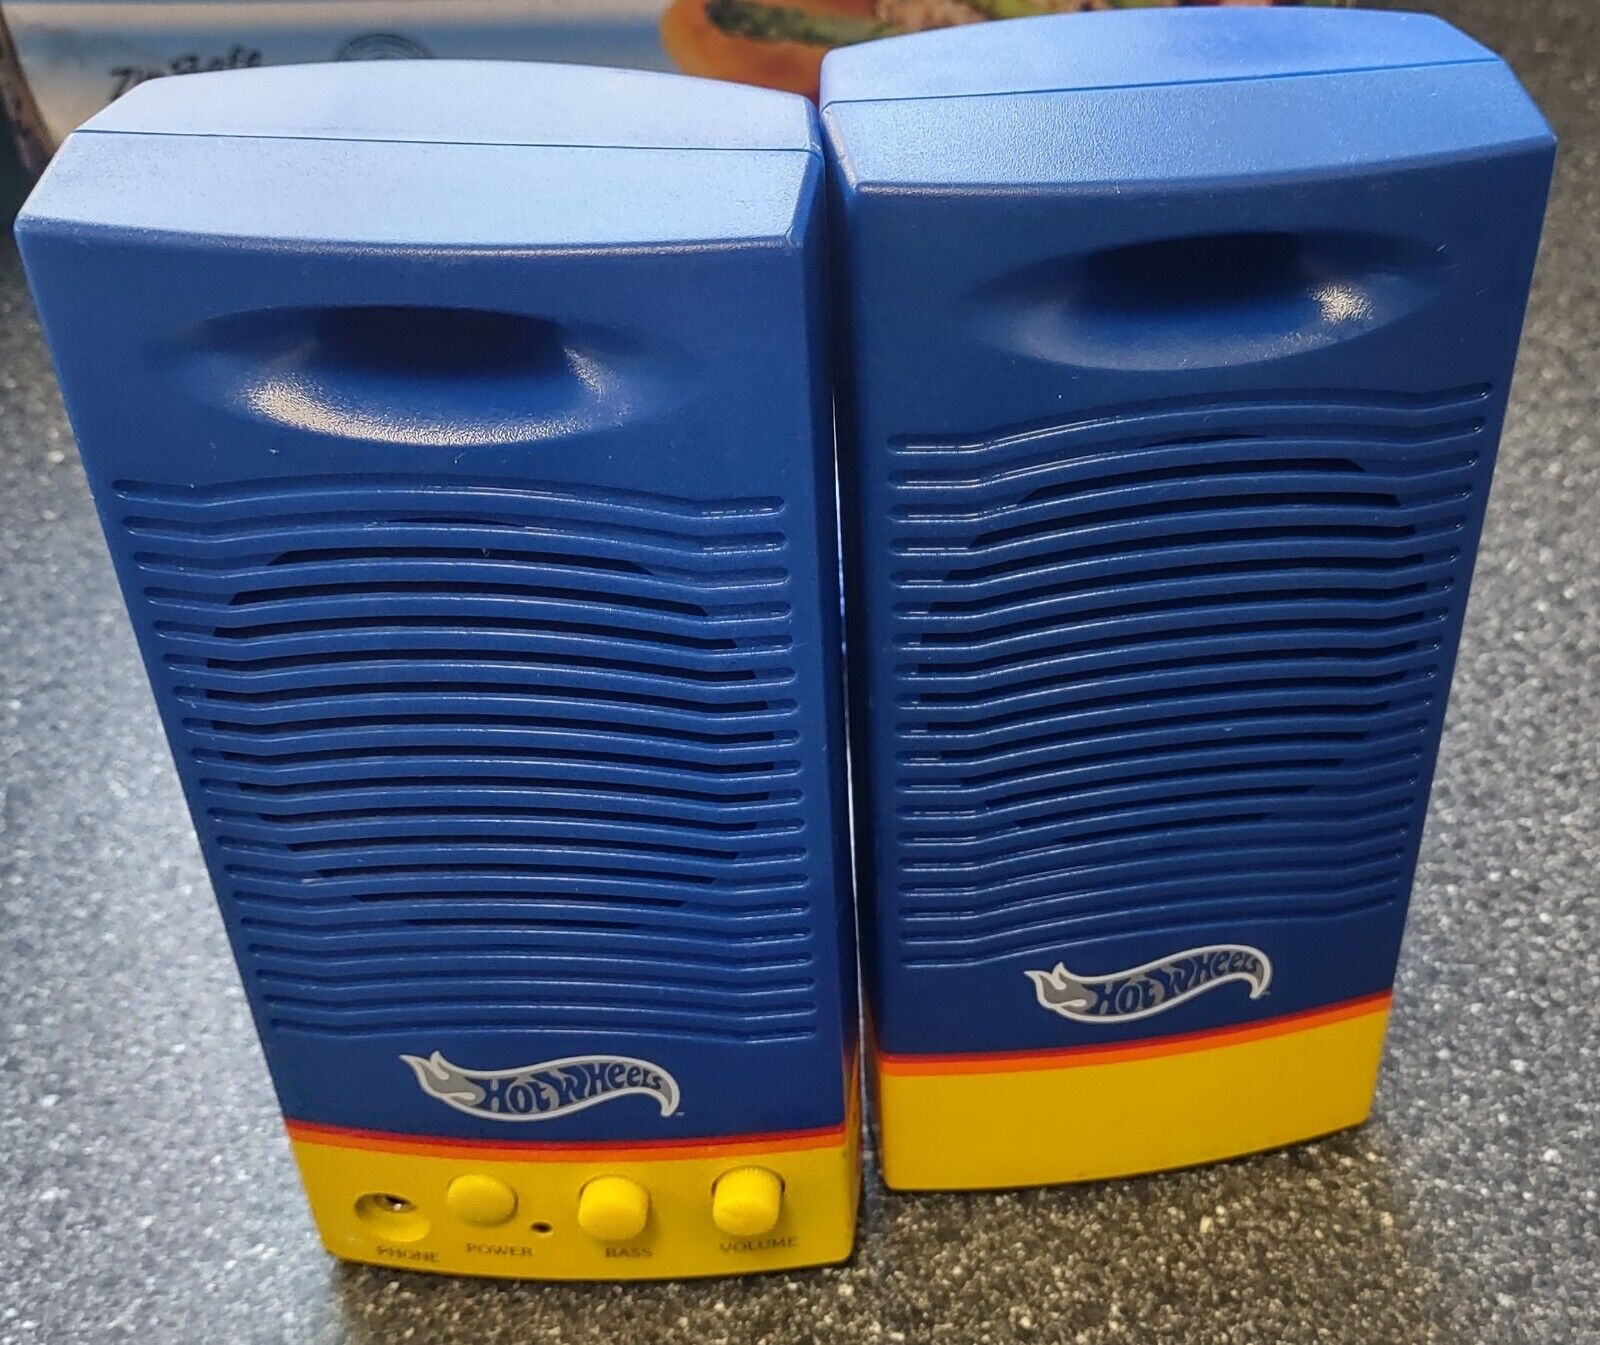 Vintage Hot Wheels Speakers - Tested And Working